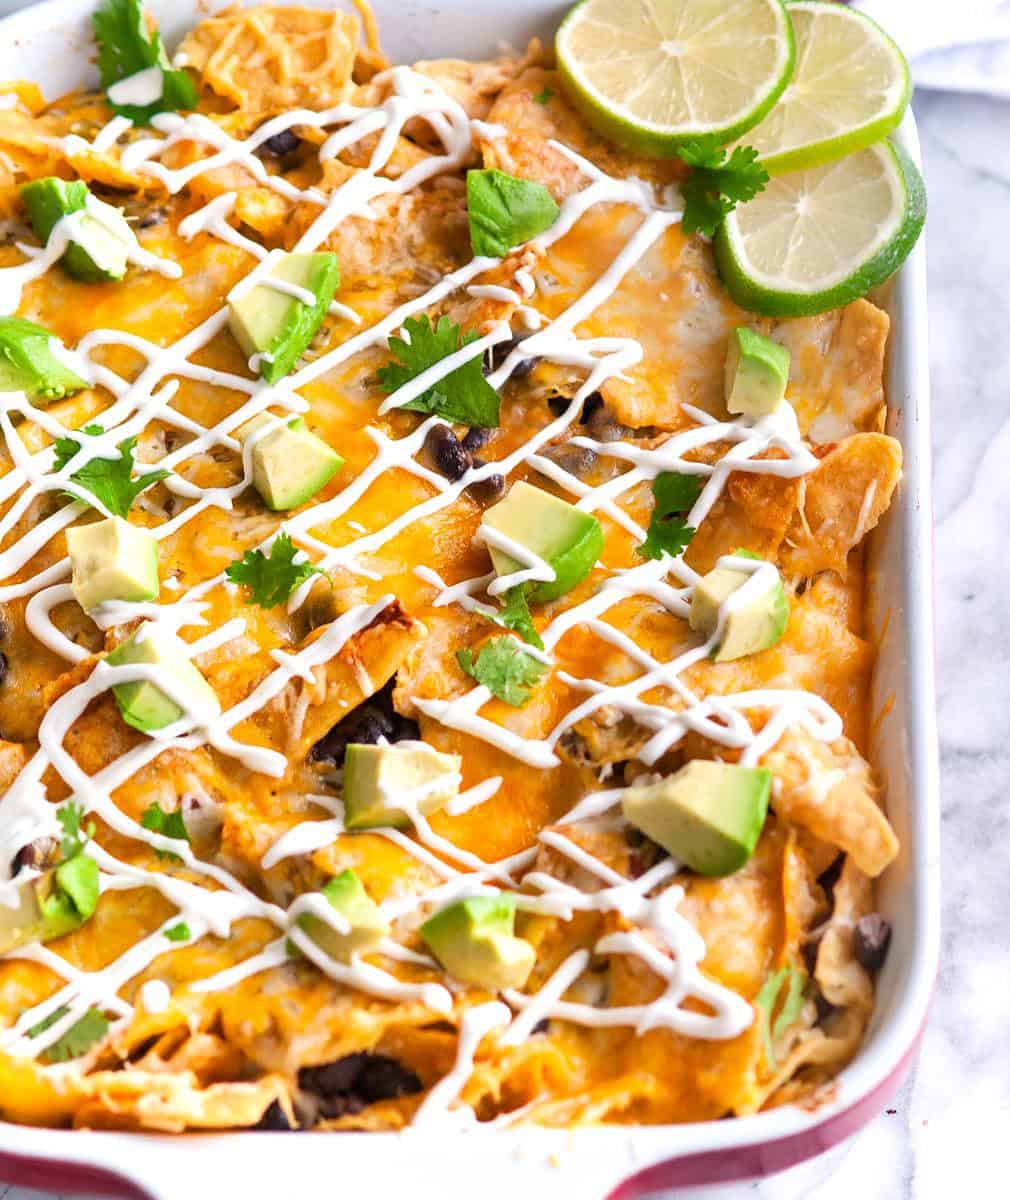  Dive into layers of cheesy, saucy goodness with this easy vegetarian chilaquiles recipe.